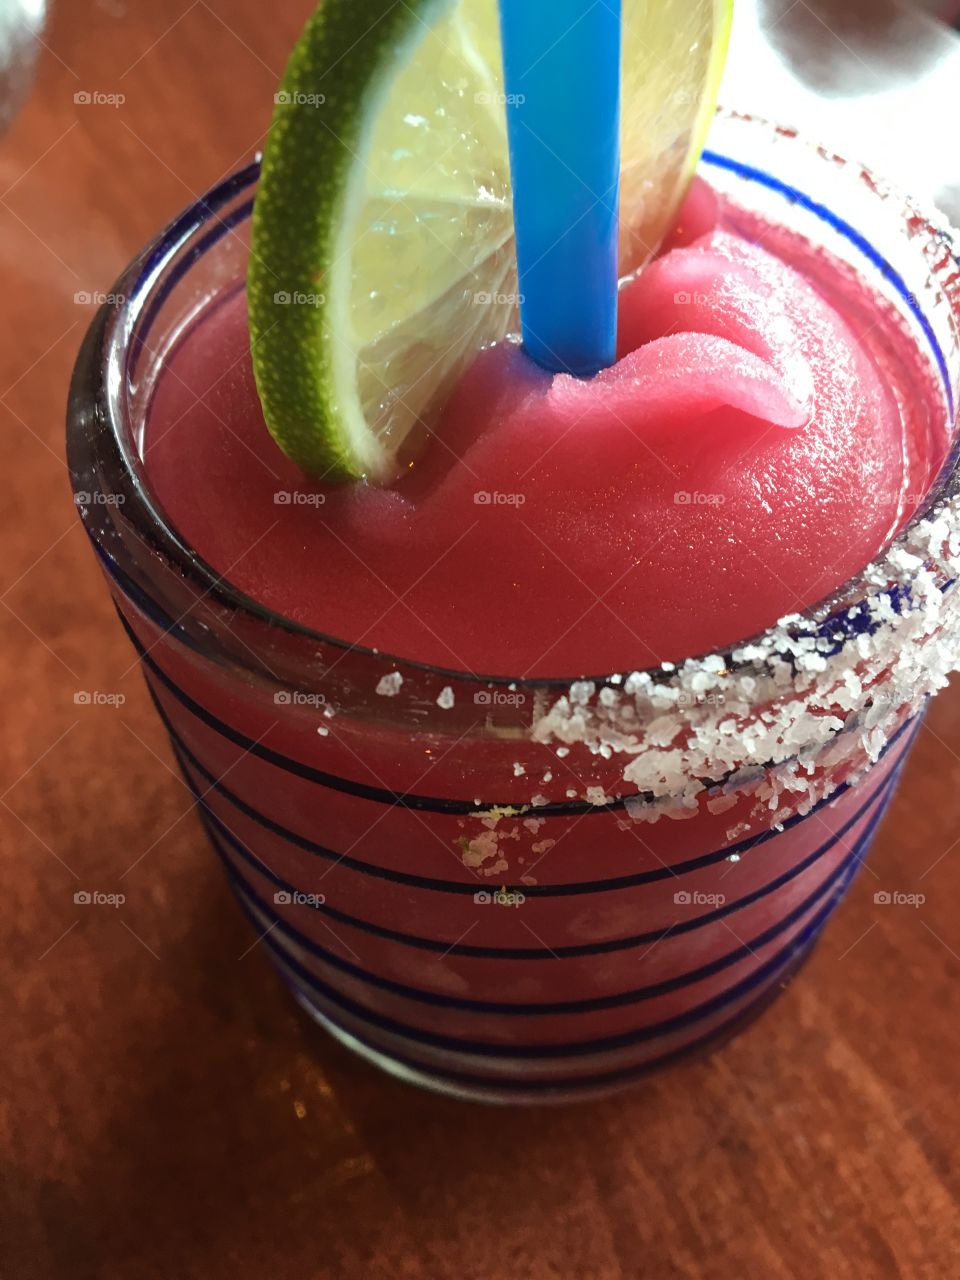 It's 5 o'clock somewhere with a delicious pomegranate margarita 